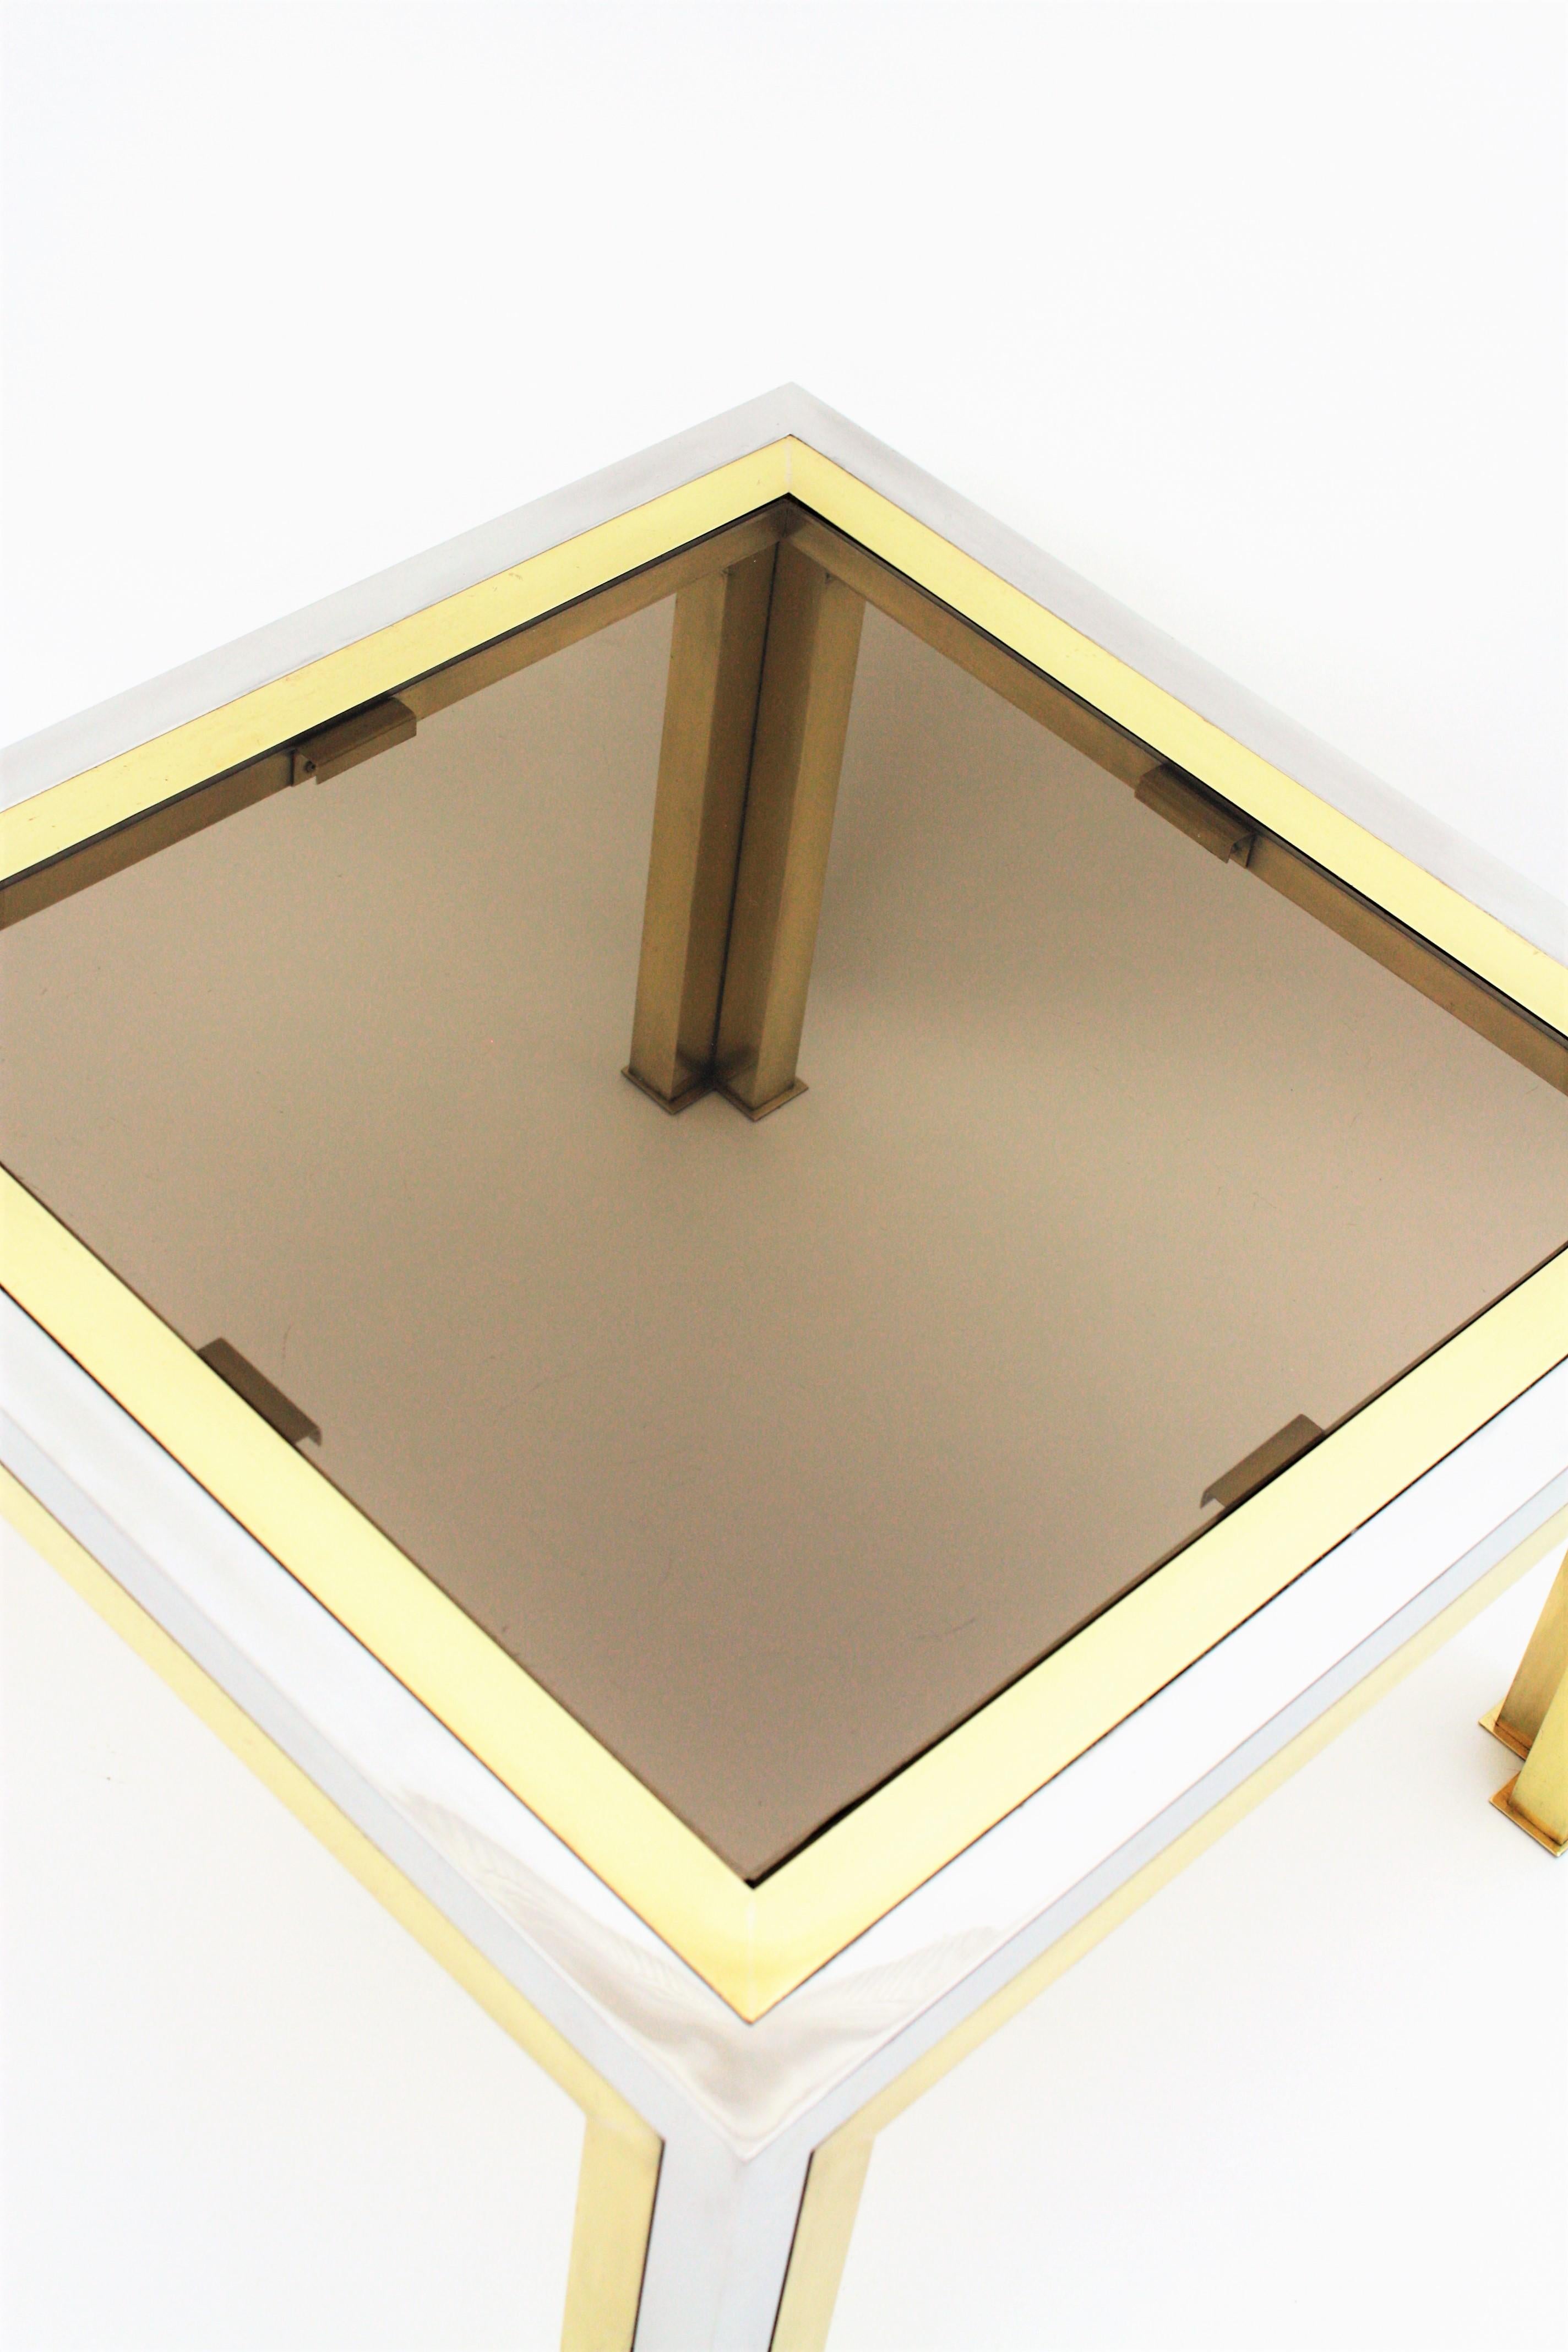 Romeo Rega Coffee Table in Brass, Chromed Steel and Glass 2